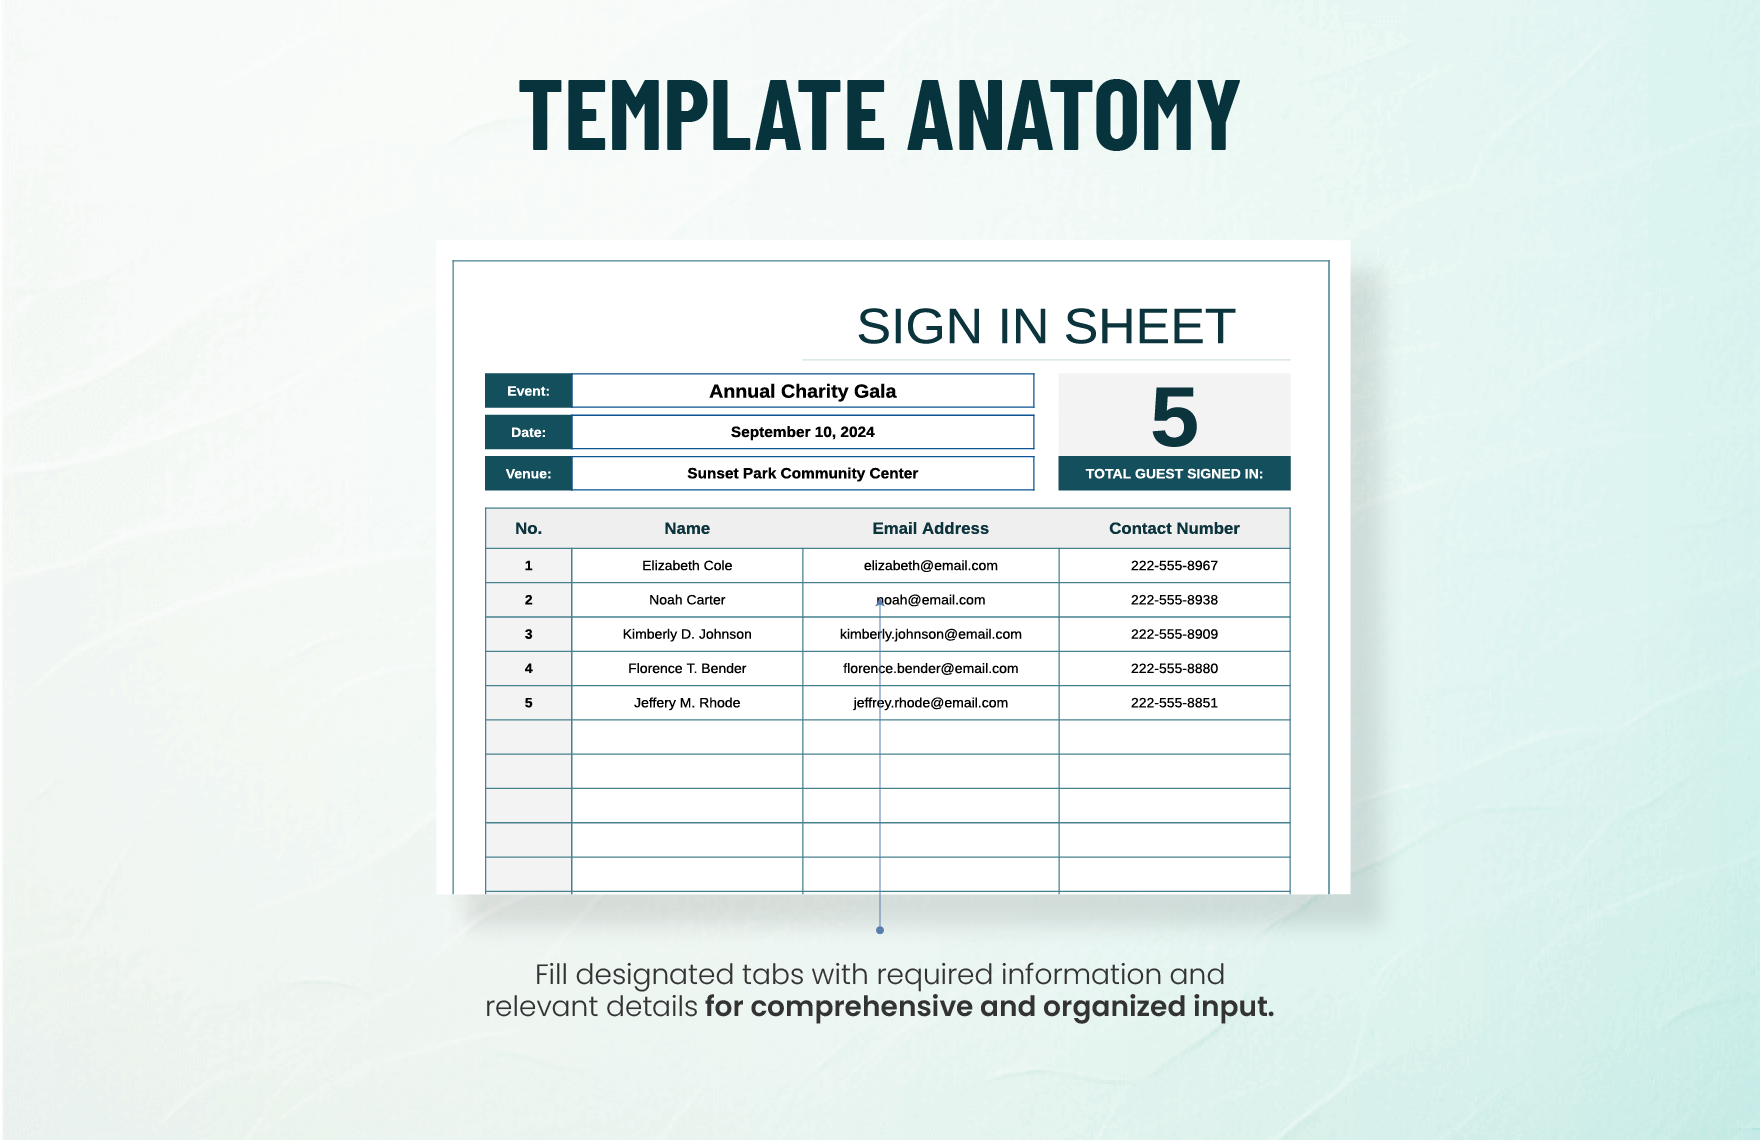 Guest Sign Out Sheet Template